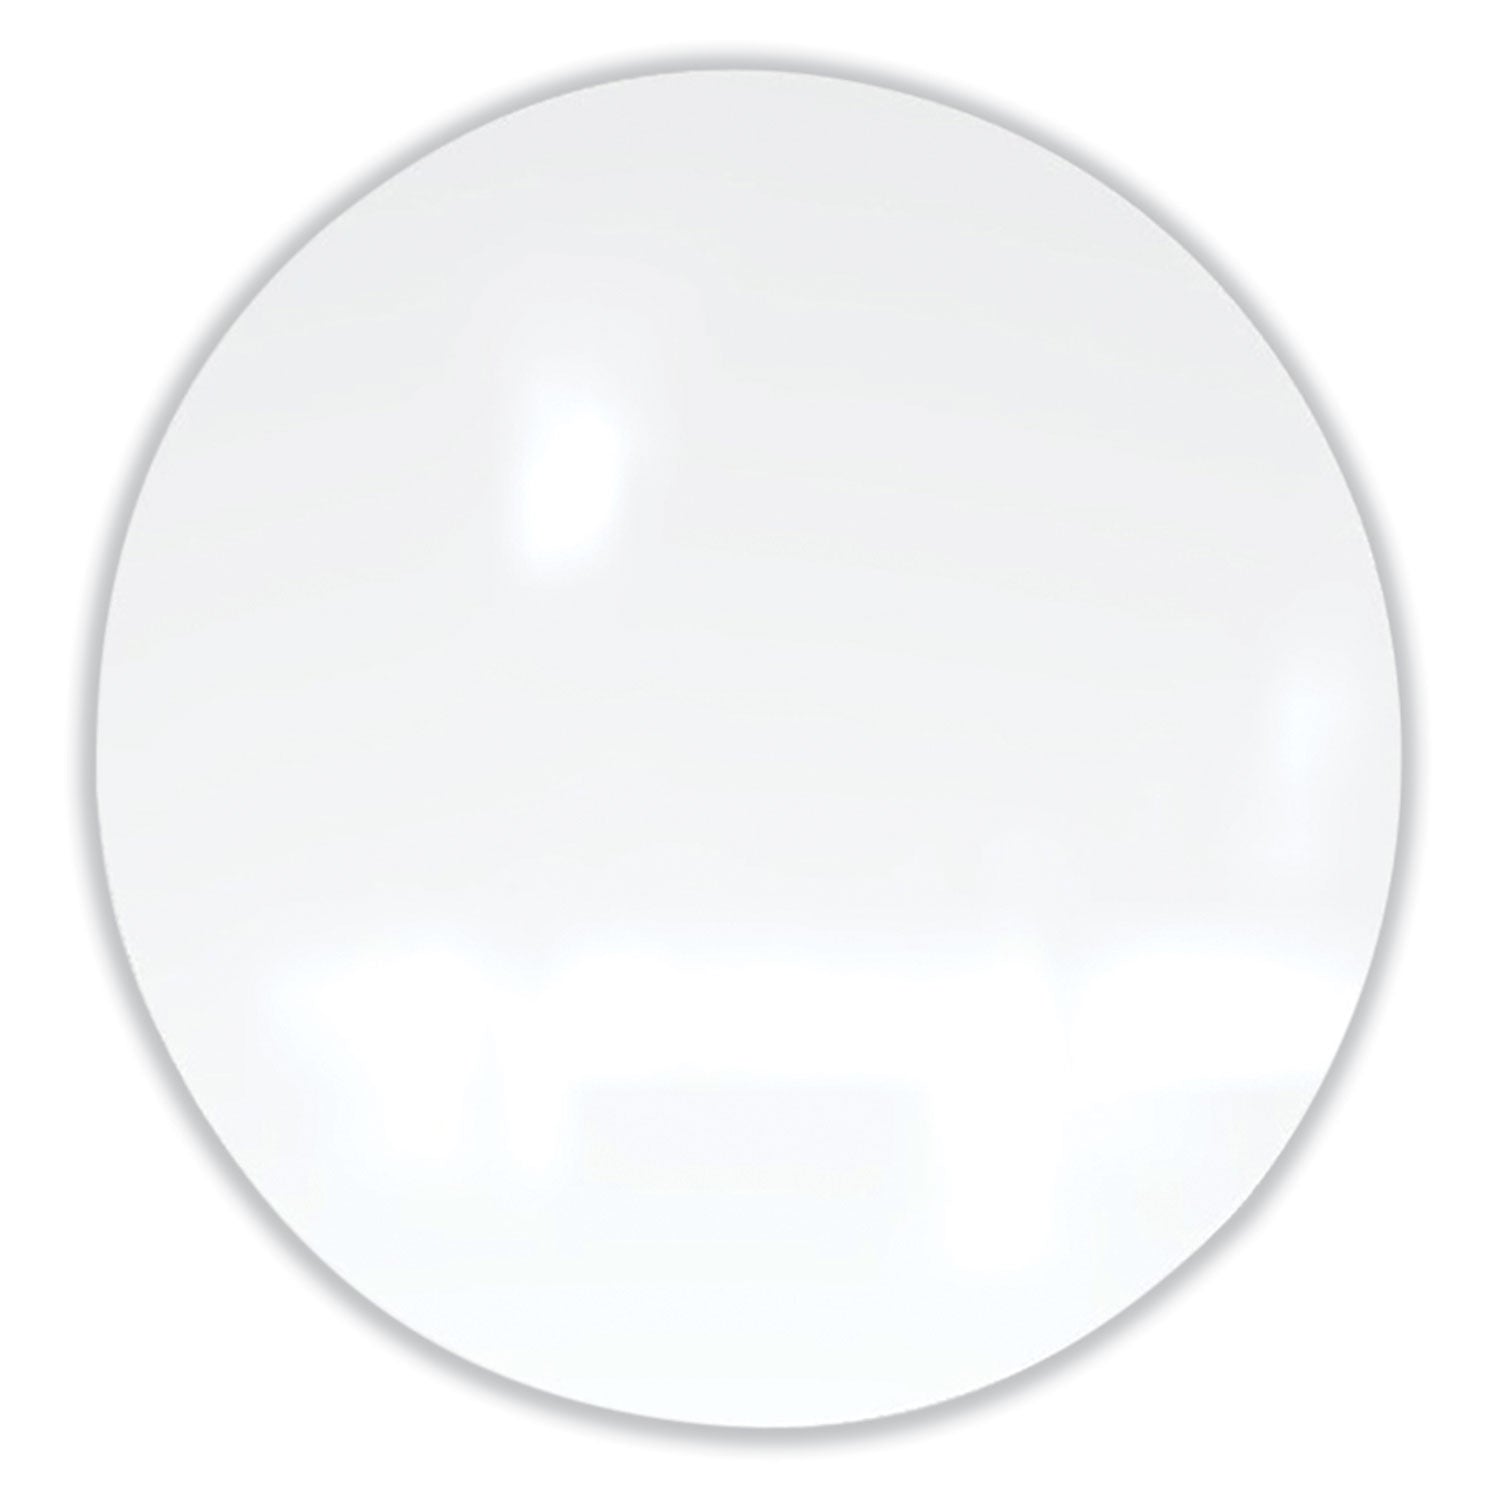 coda-low-profile-circular-non-magnetic-glassboard-24-diameter-white-surface-ships-in-7-10-business-days_ghecdagn24wh - 1